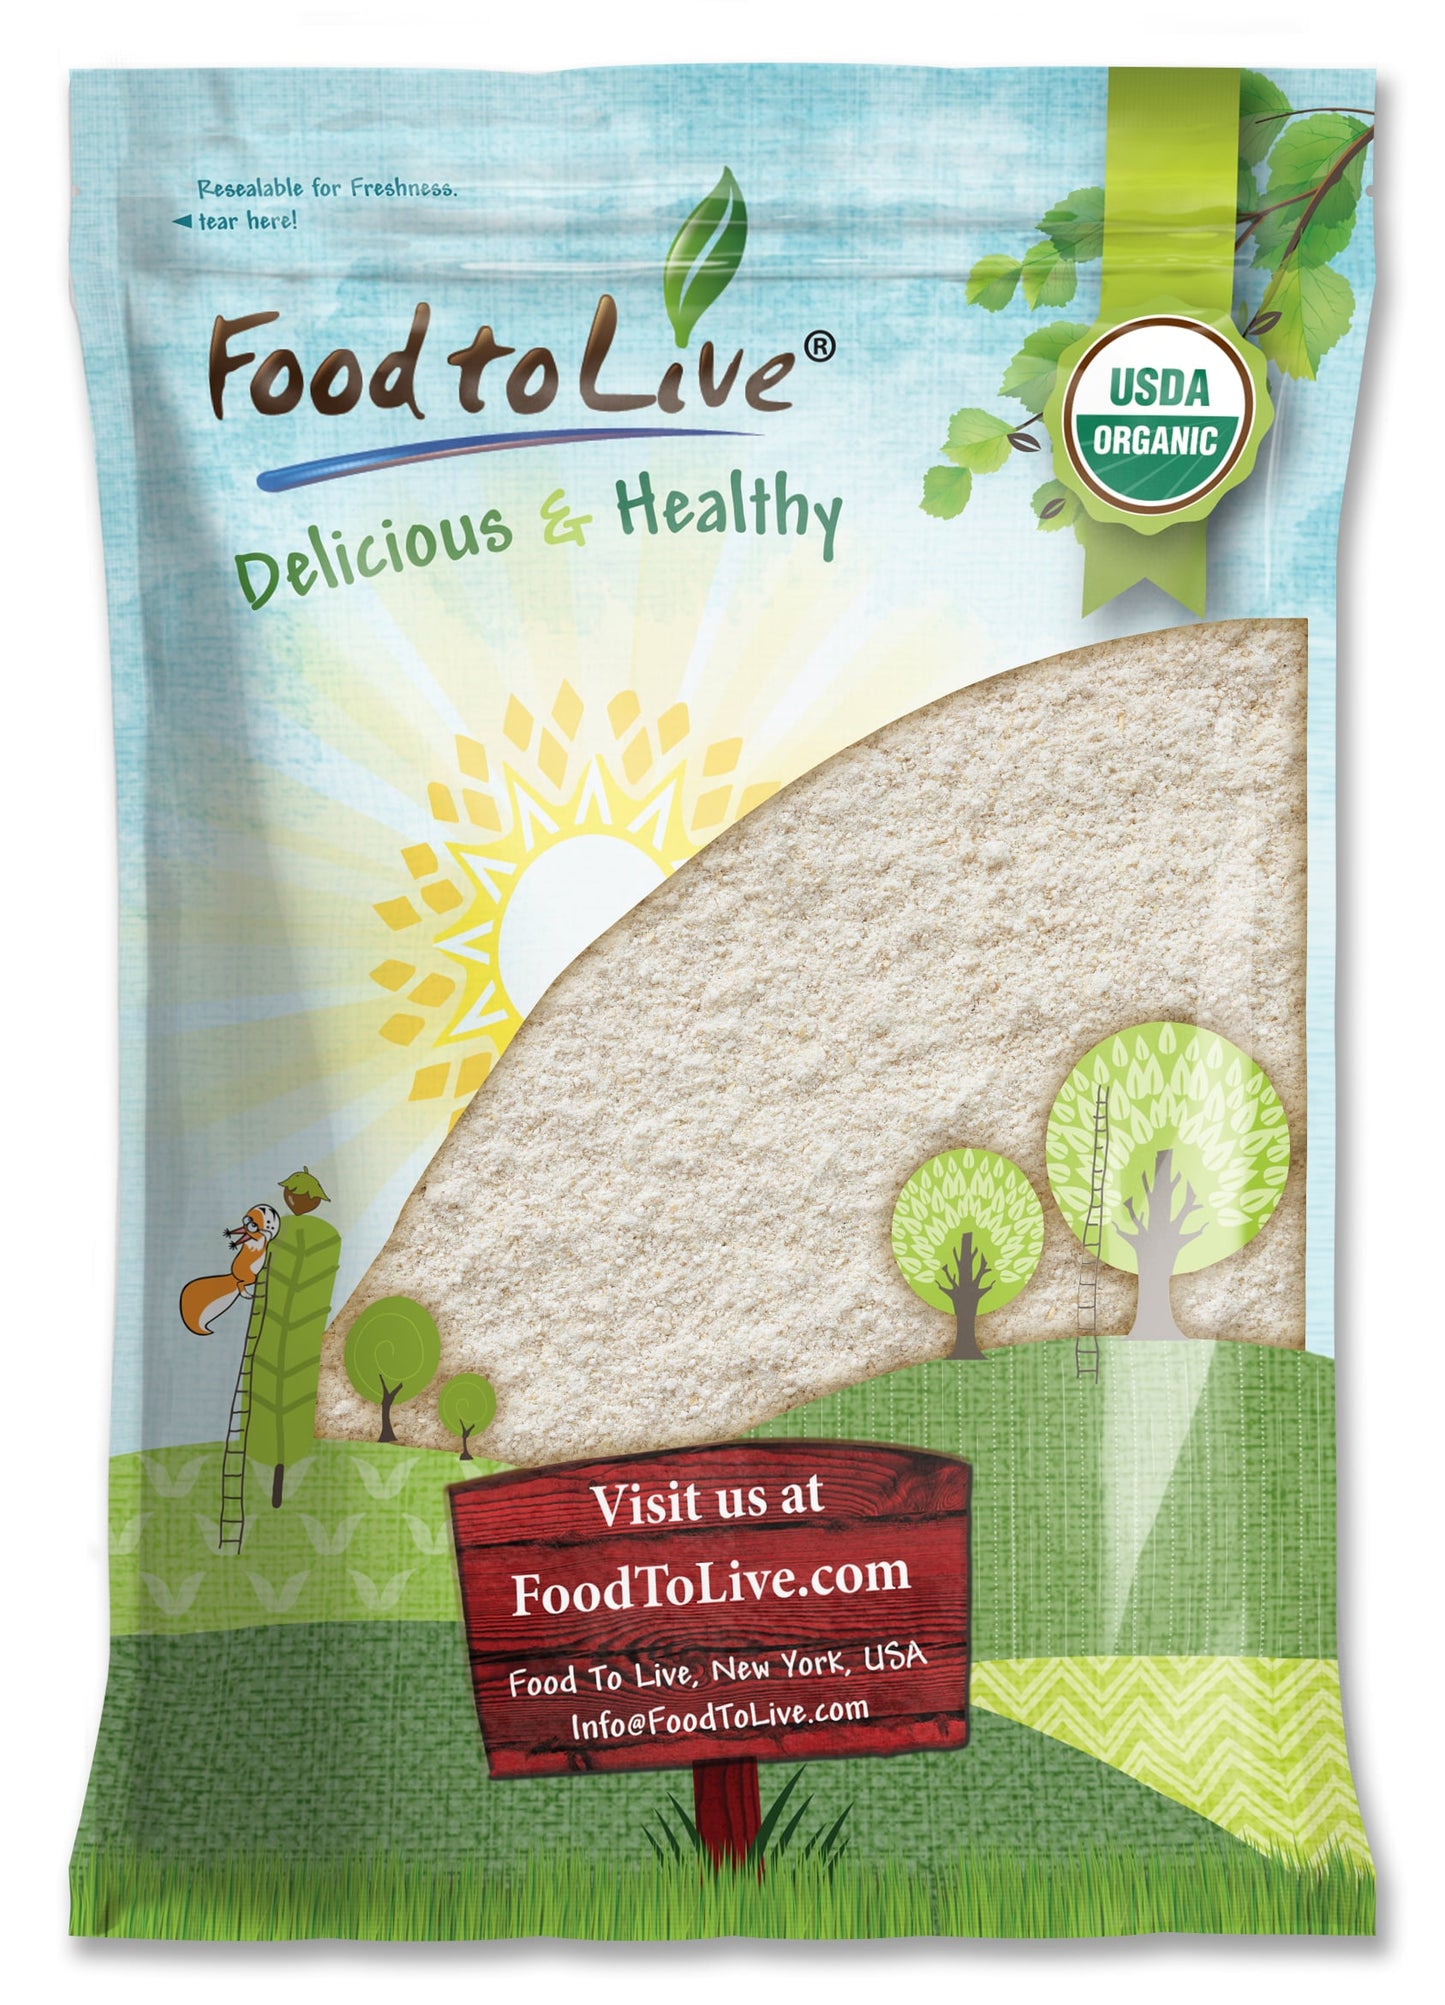 Organic Whole Wheat Pastry Flour - Non-GMO, Finely Ground, Unbleached, Unbromated, Vegan, Kosher, No Preservatives, Bulk - by Food to Live